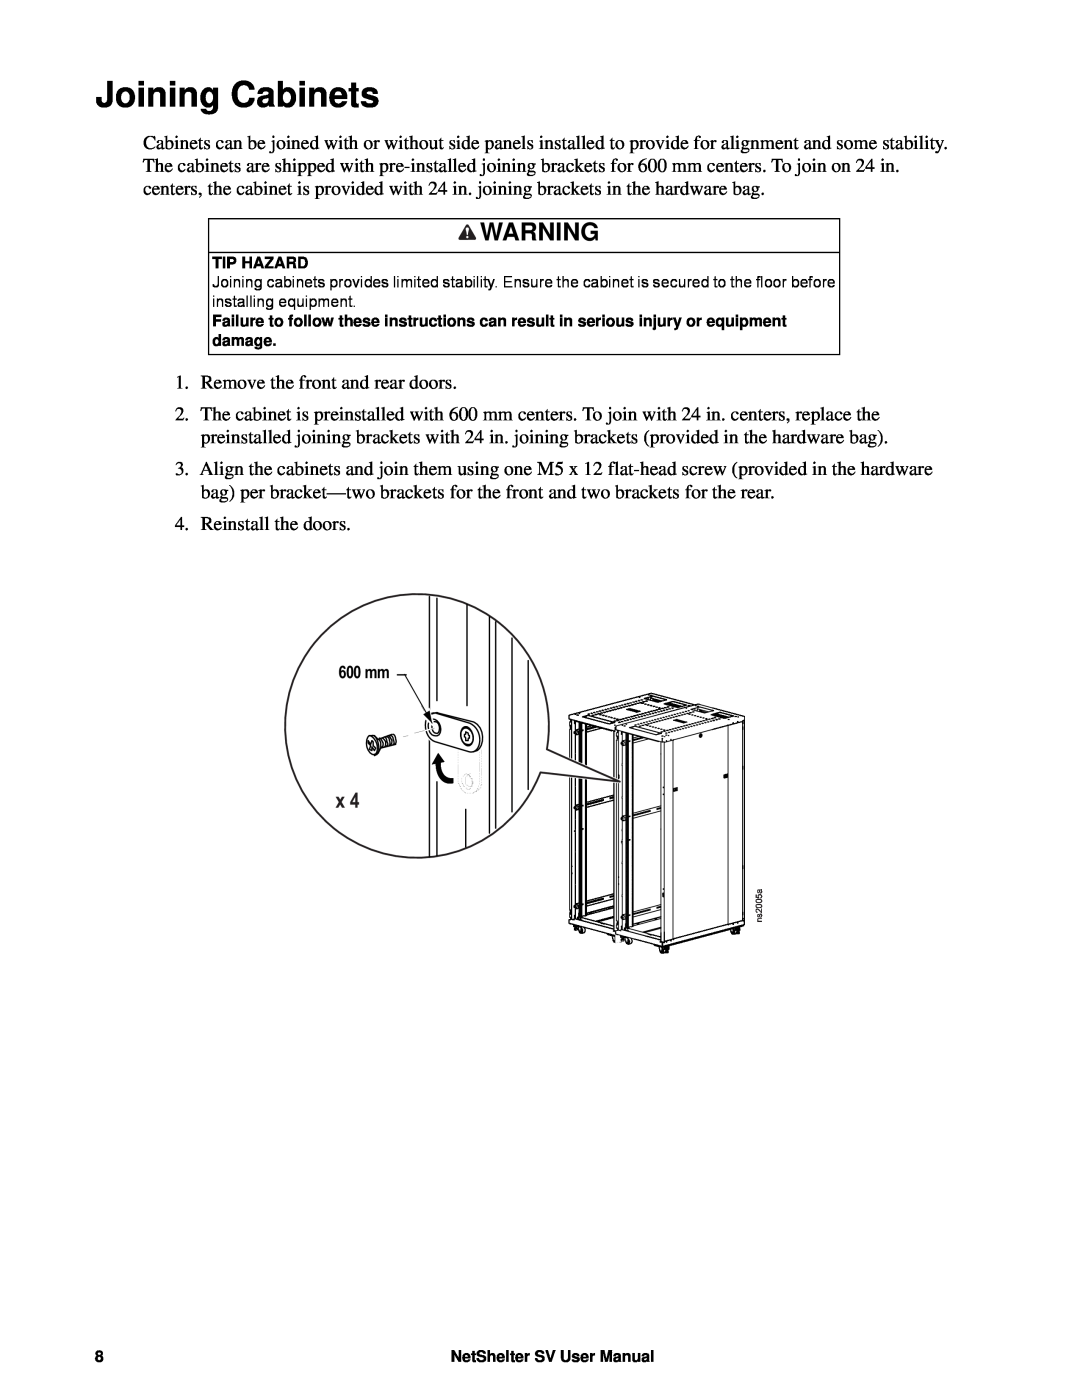 APC AR2400 user manual Joining Cabinets 